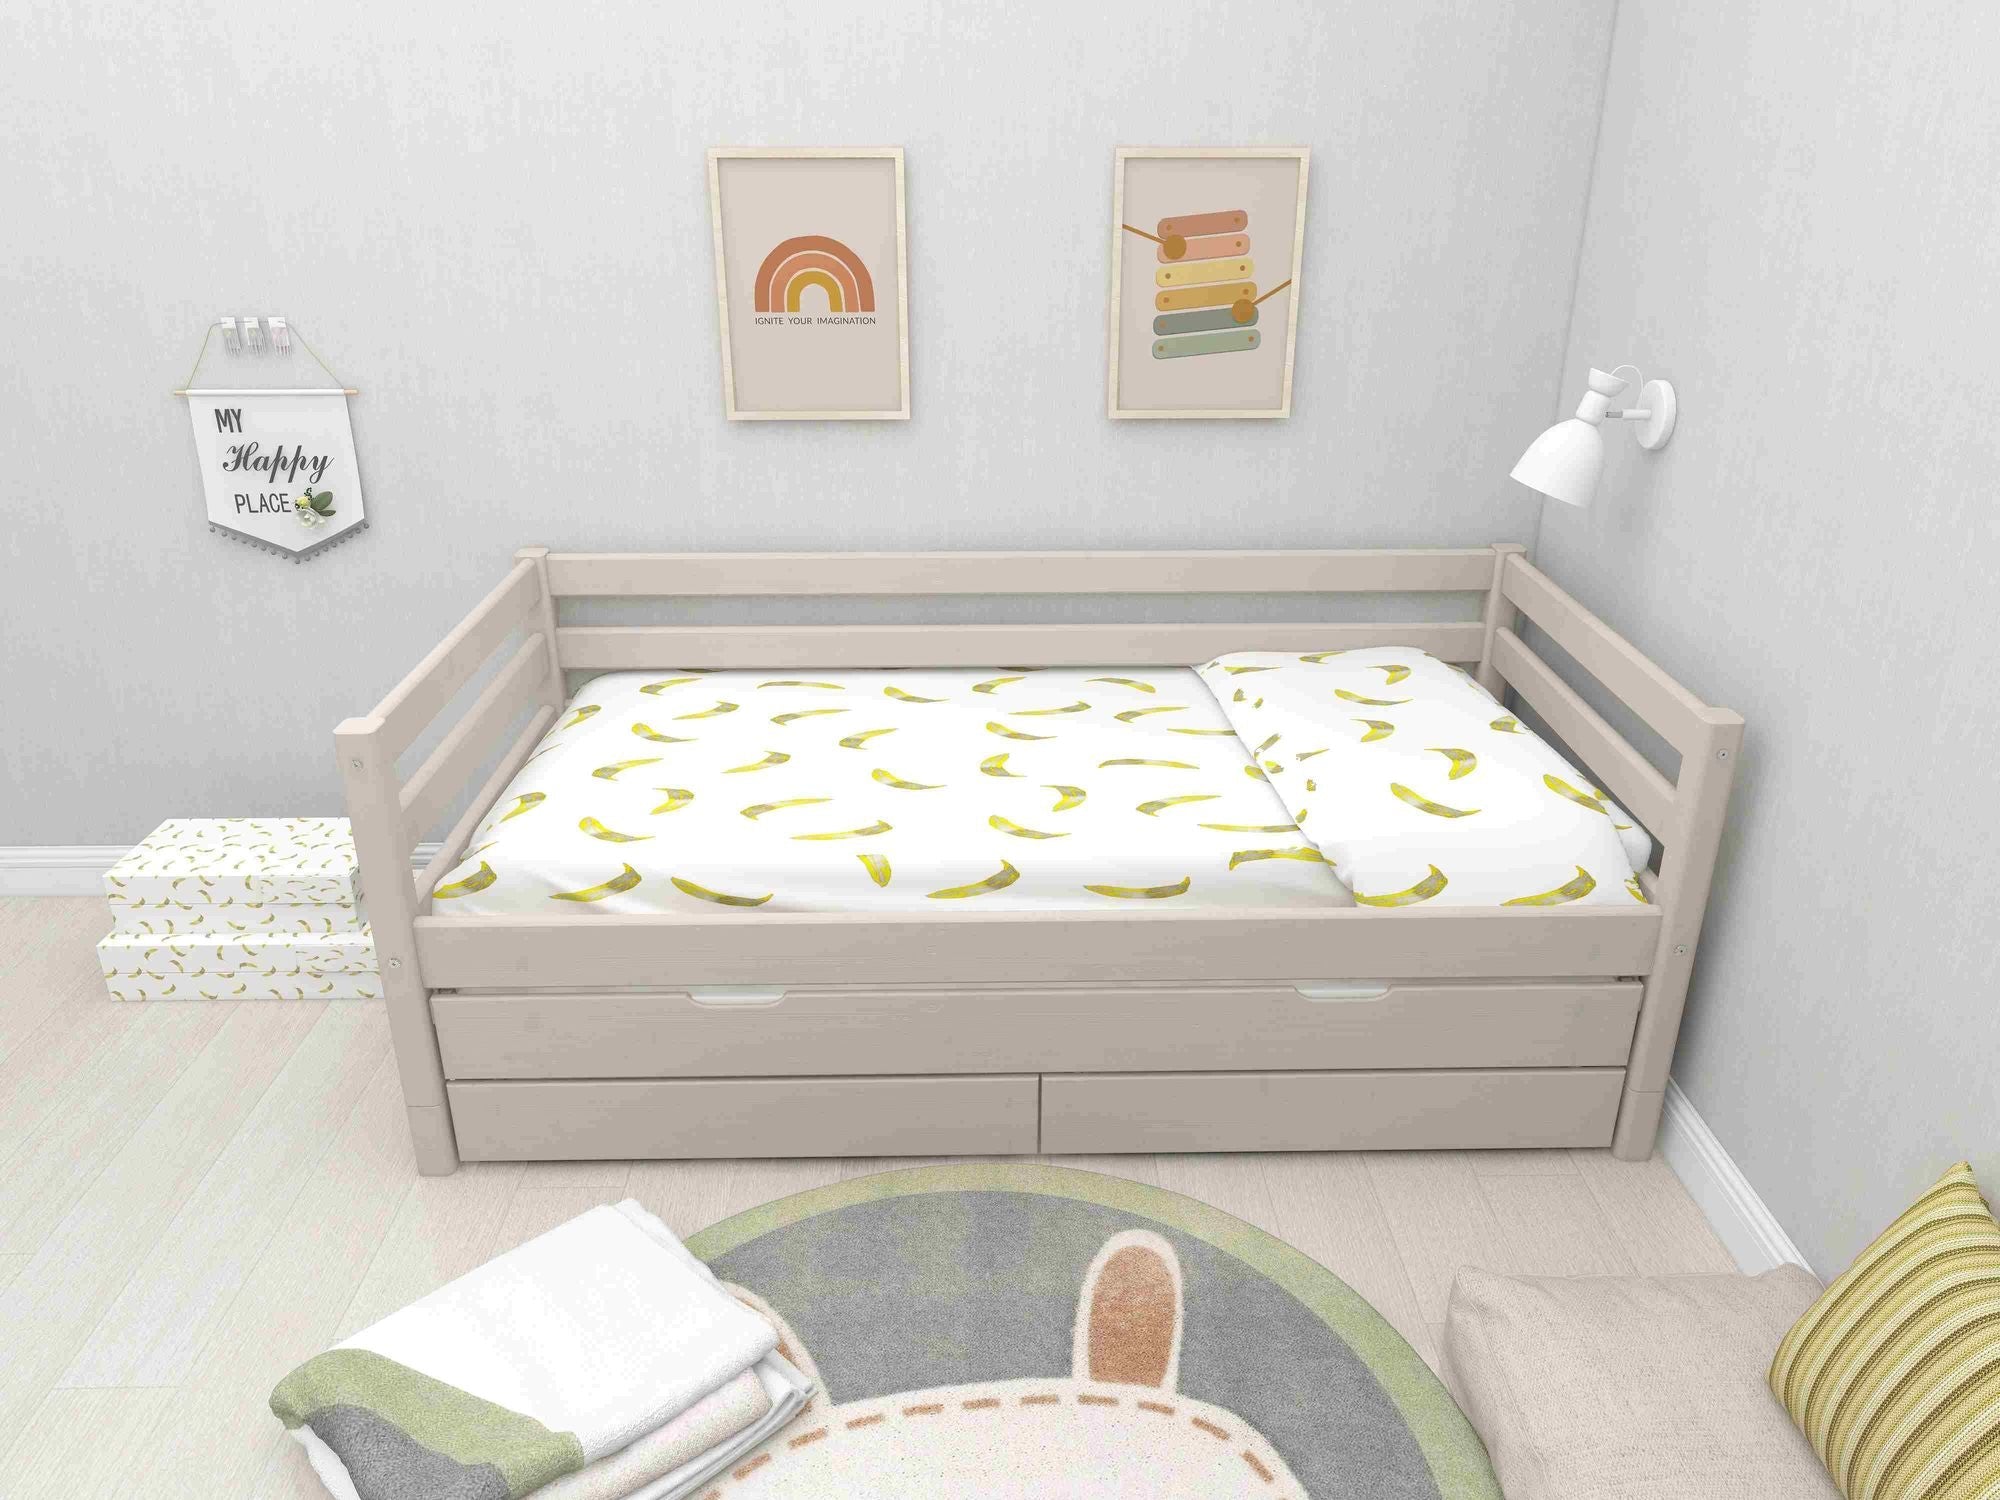 FLEXA Single bed with trundle pullout bed